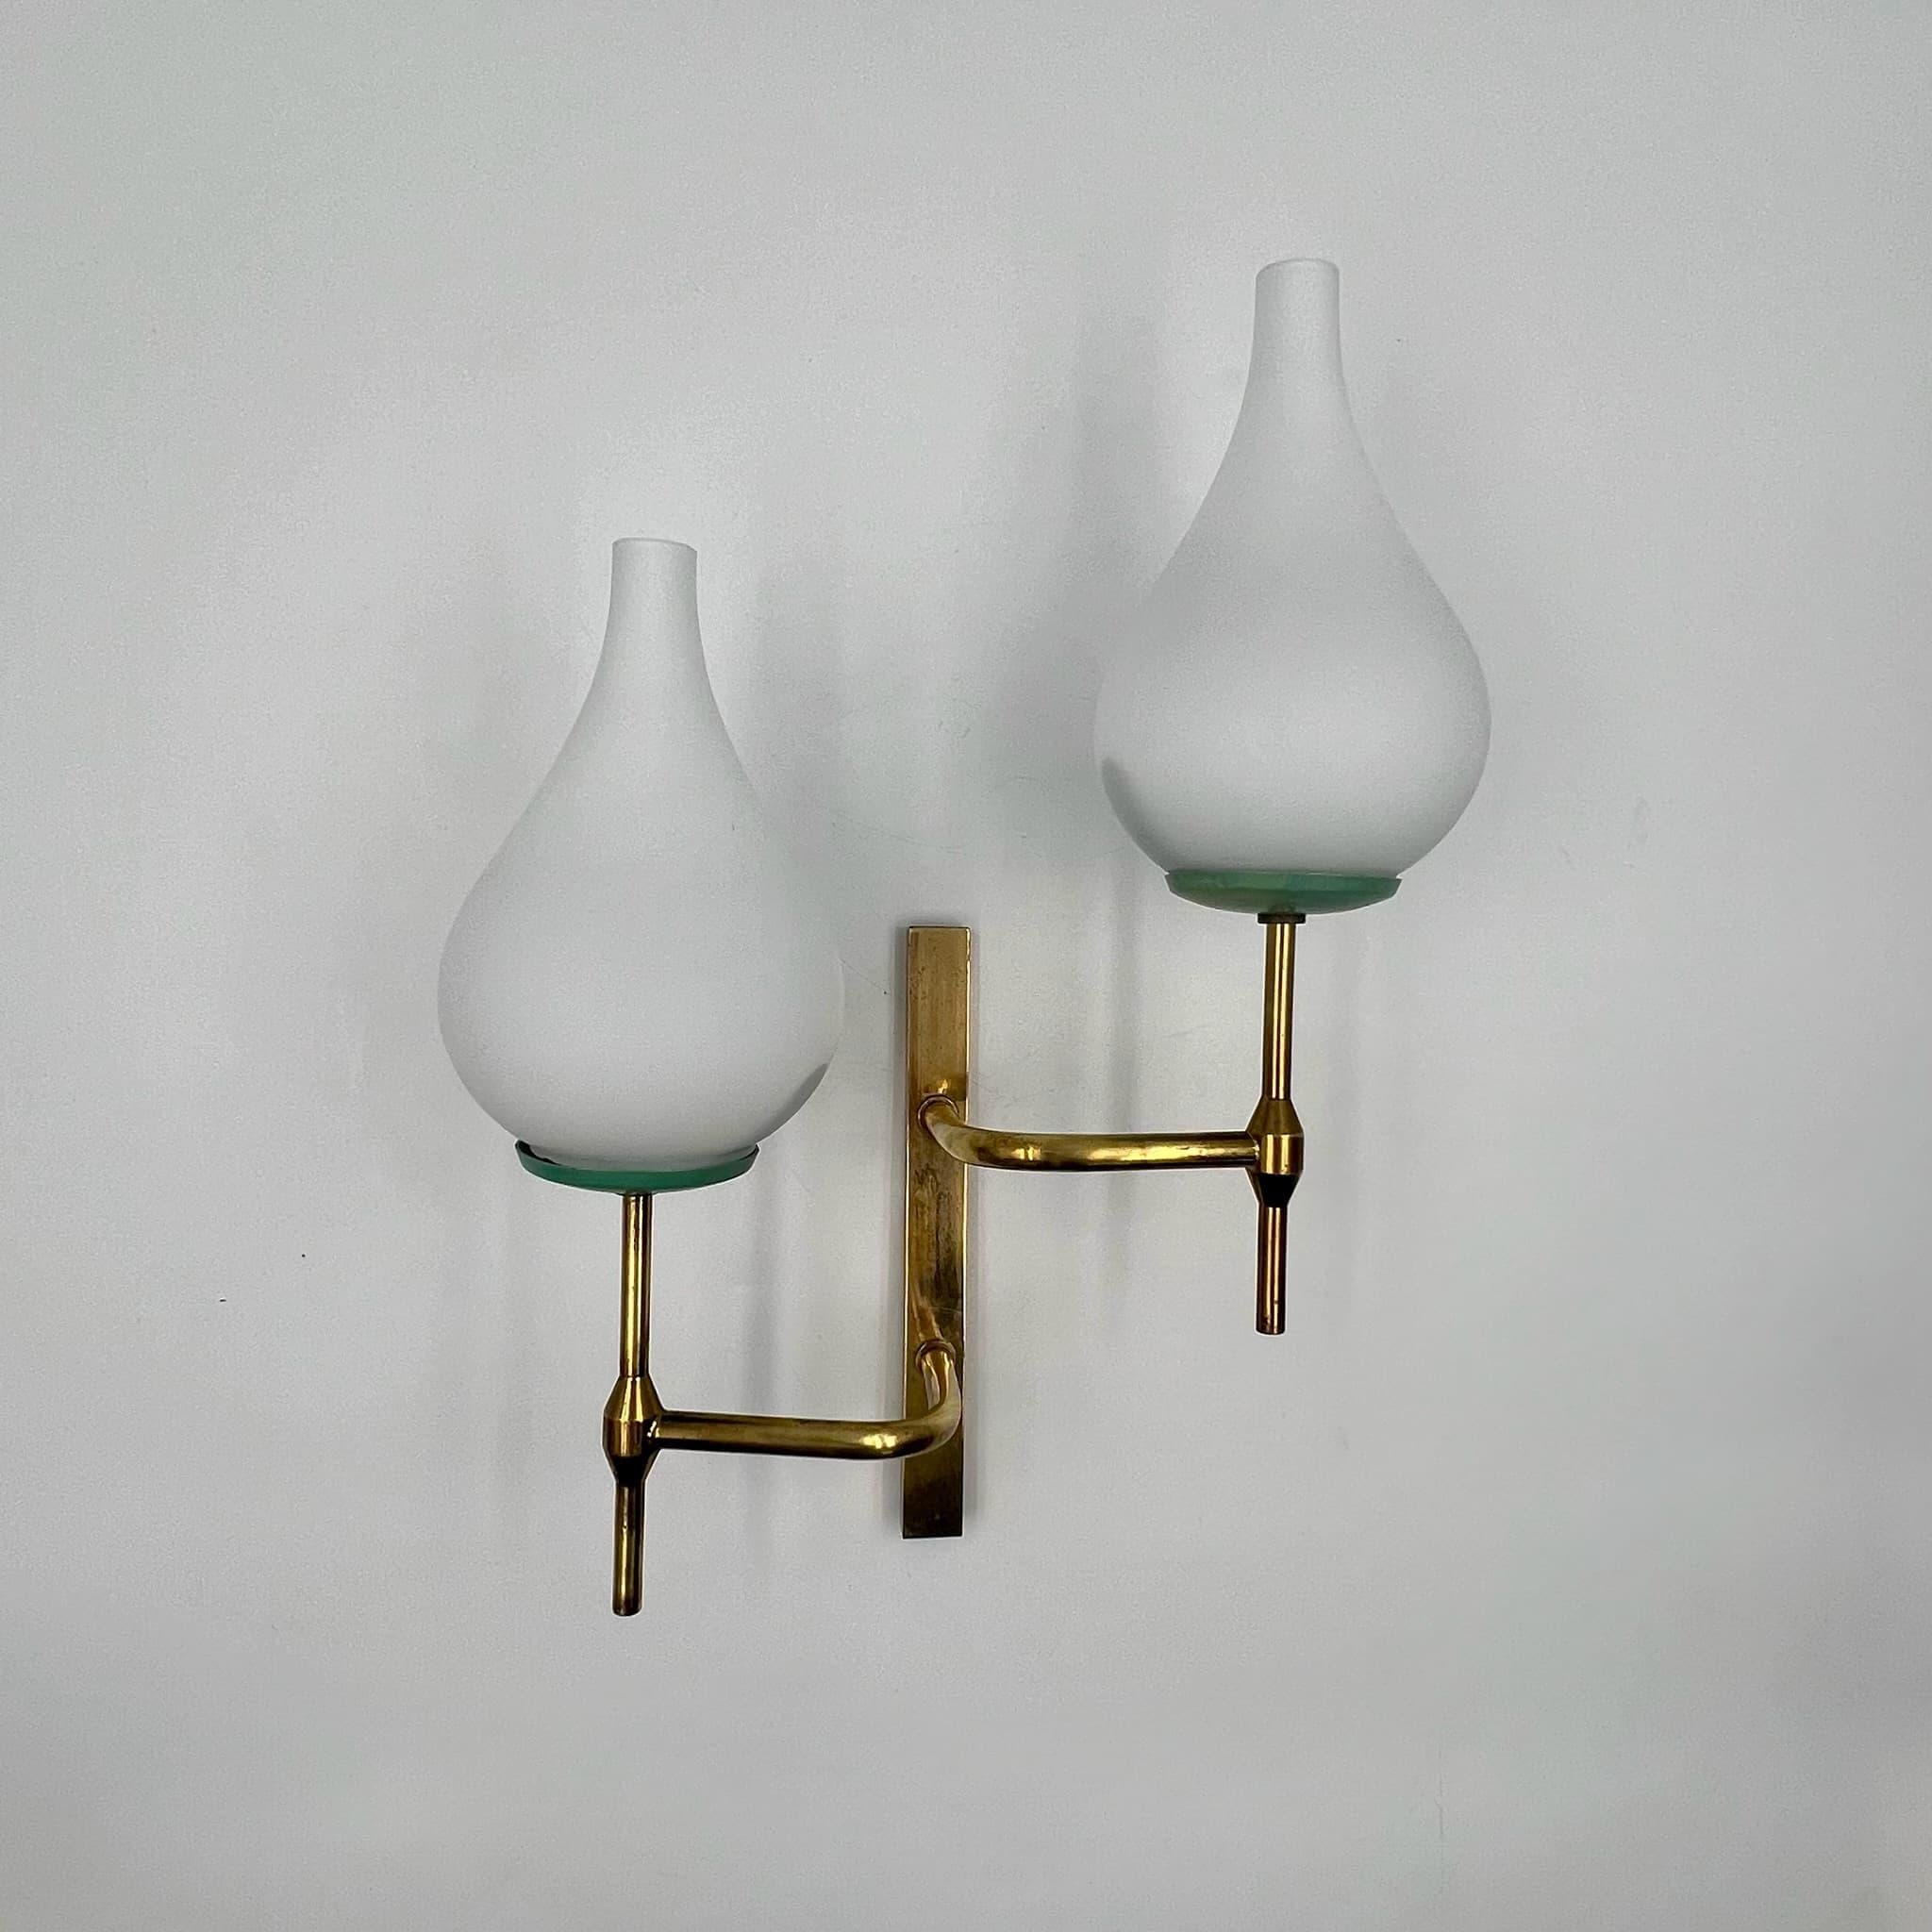 Illuminate your space with mid-century charm using this exquisite Stilnovo-inspired vintage 50s lamp crafted in Italy. Made from brass and opaline glass, this wall light epitomizes the sophistication and craftsmanship synonymous with the Stilnovo